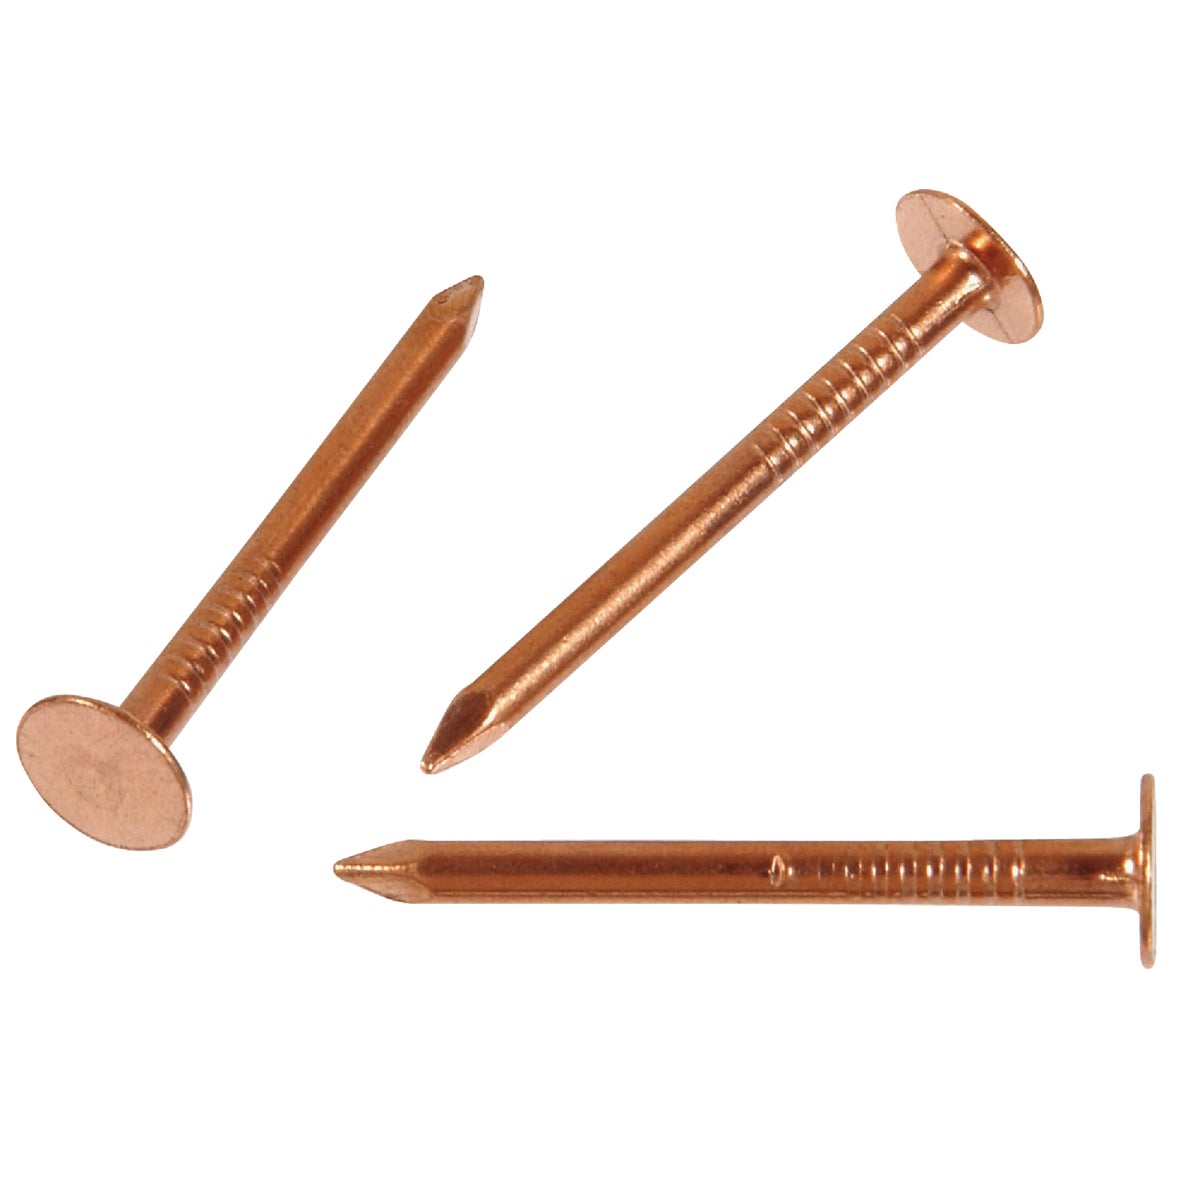 Item 736414, Copper Slating Nails have a large flat head, annular ring, and diamond 